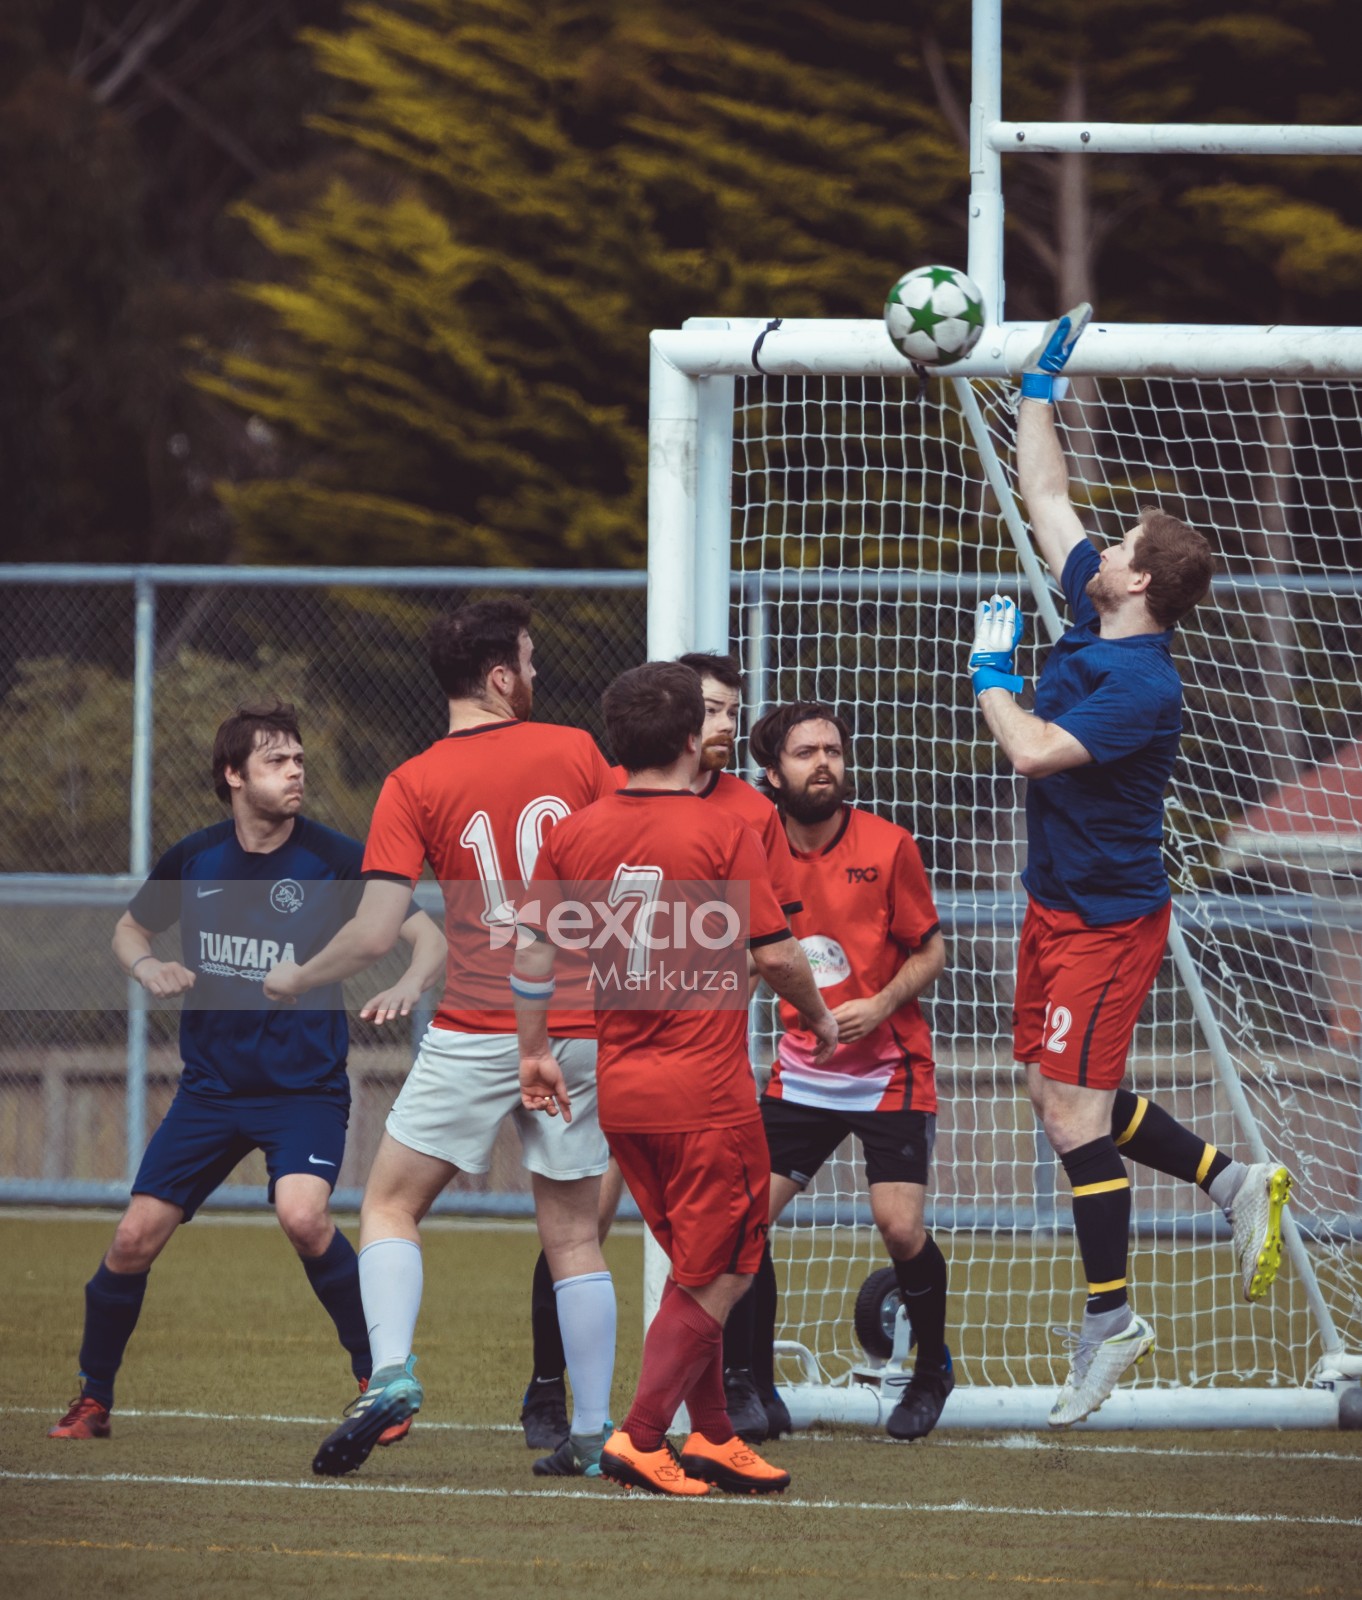 Goalkeeper slapping away ball from scoring a goal - Sports Zone sunday league